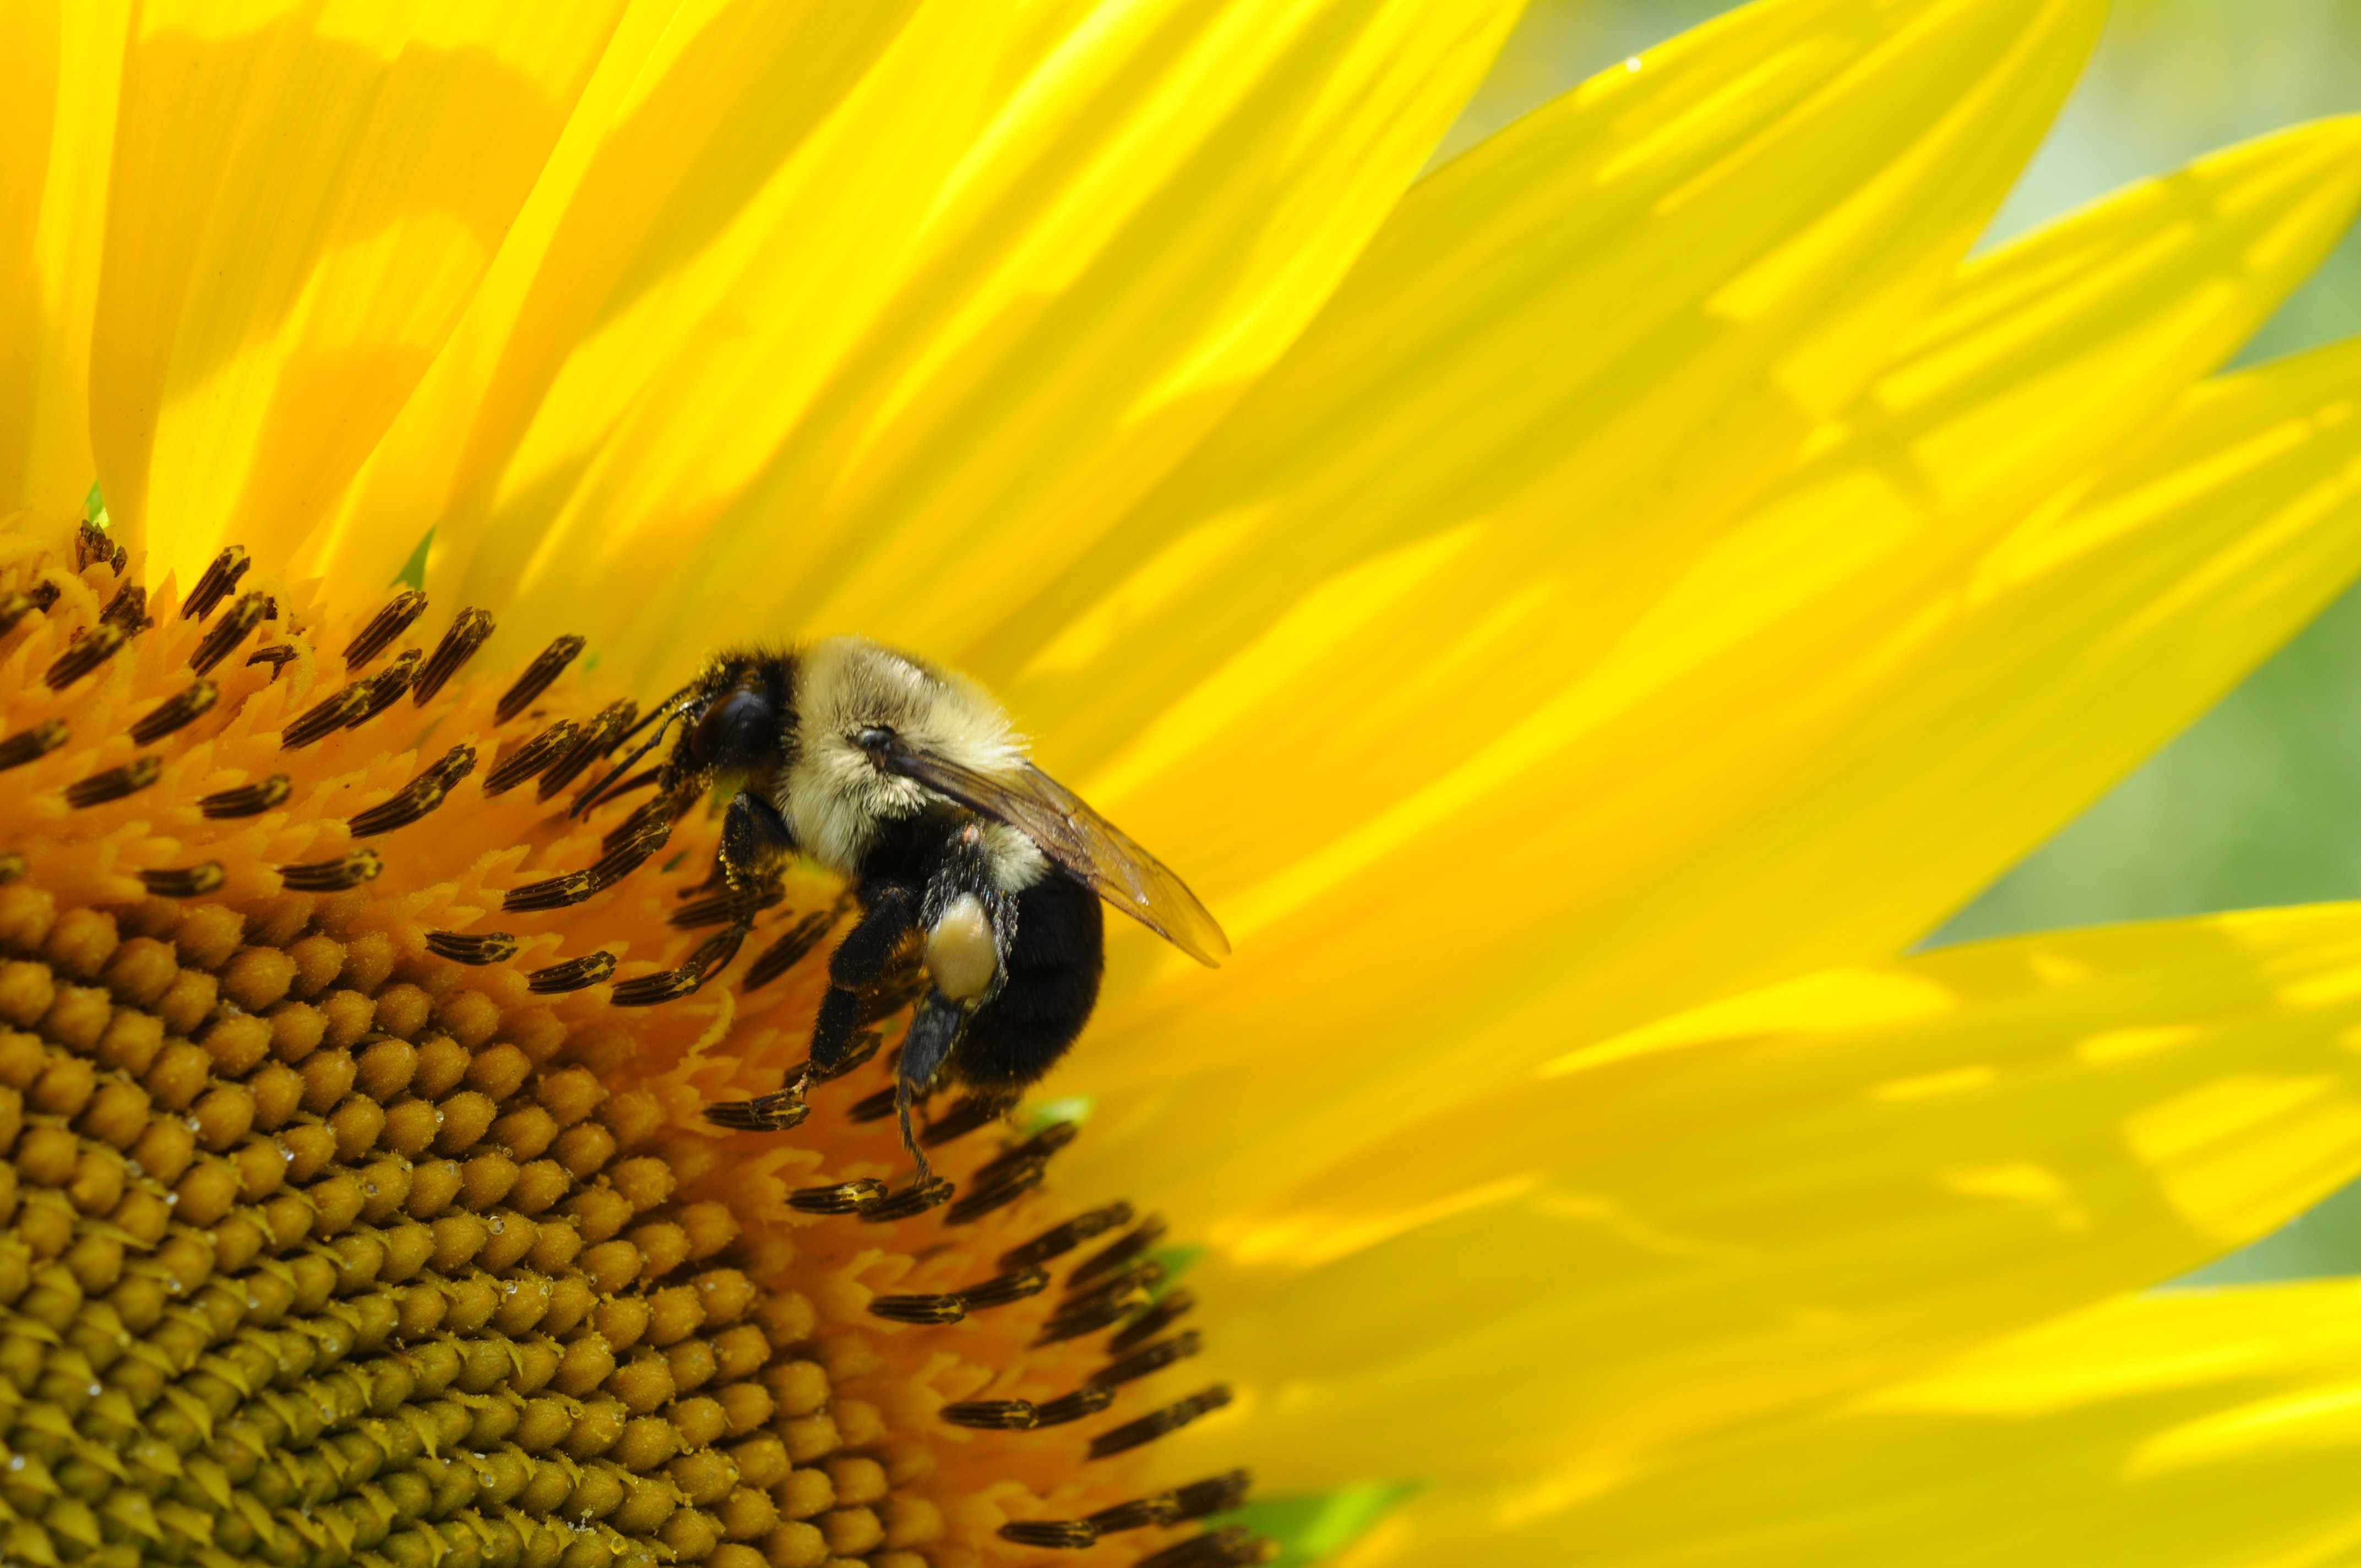 Close-up of Bee on Yellow Flower, Animal, Growth, Sunflower, Summer, HQ Photo